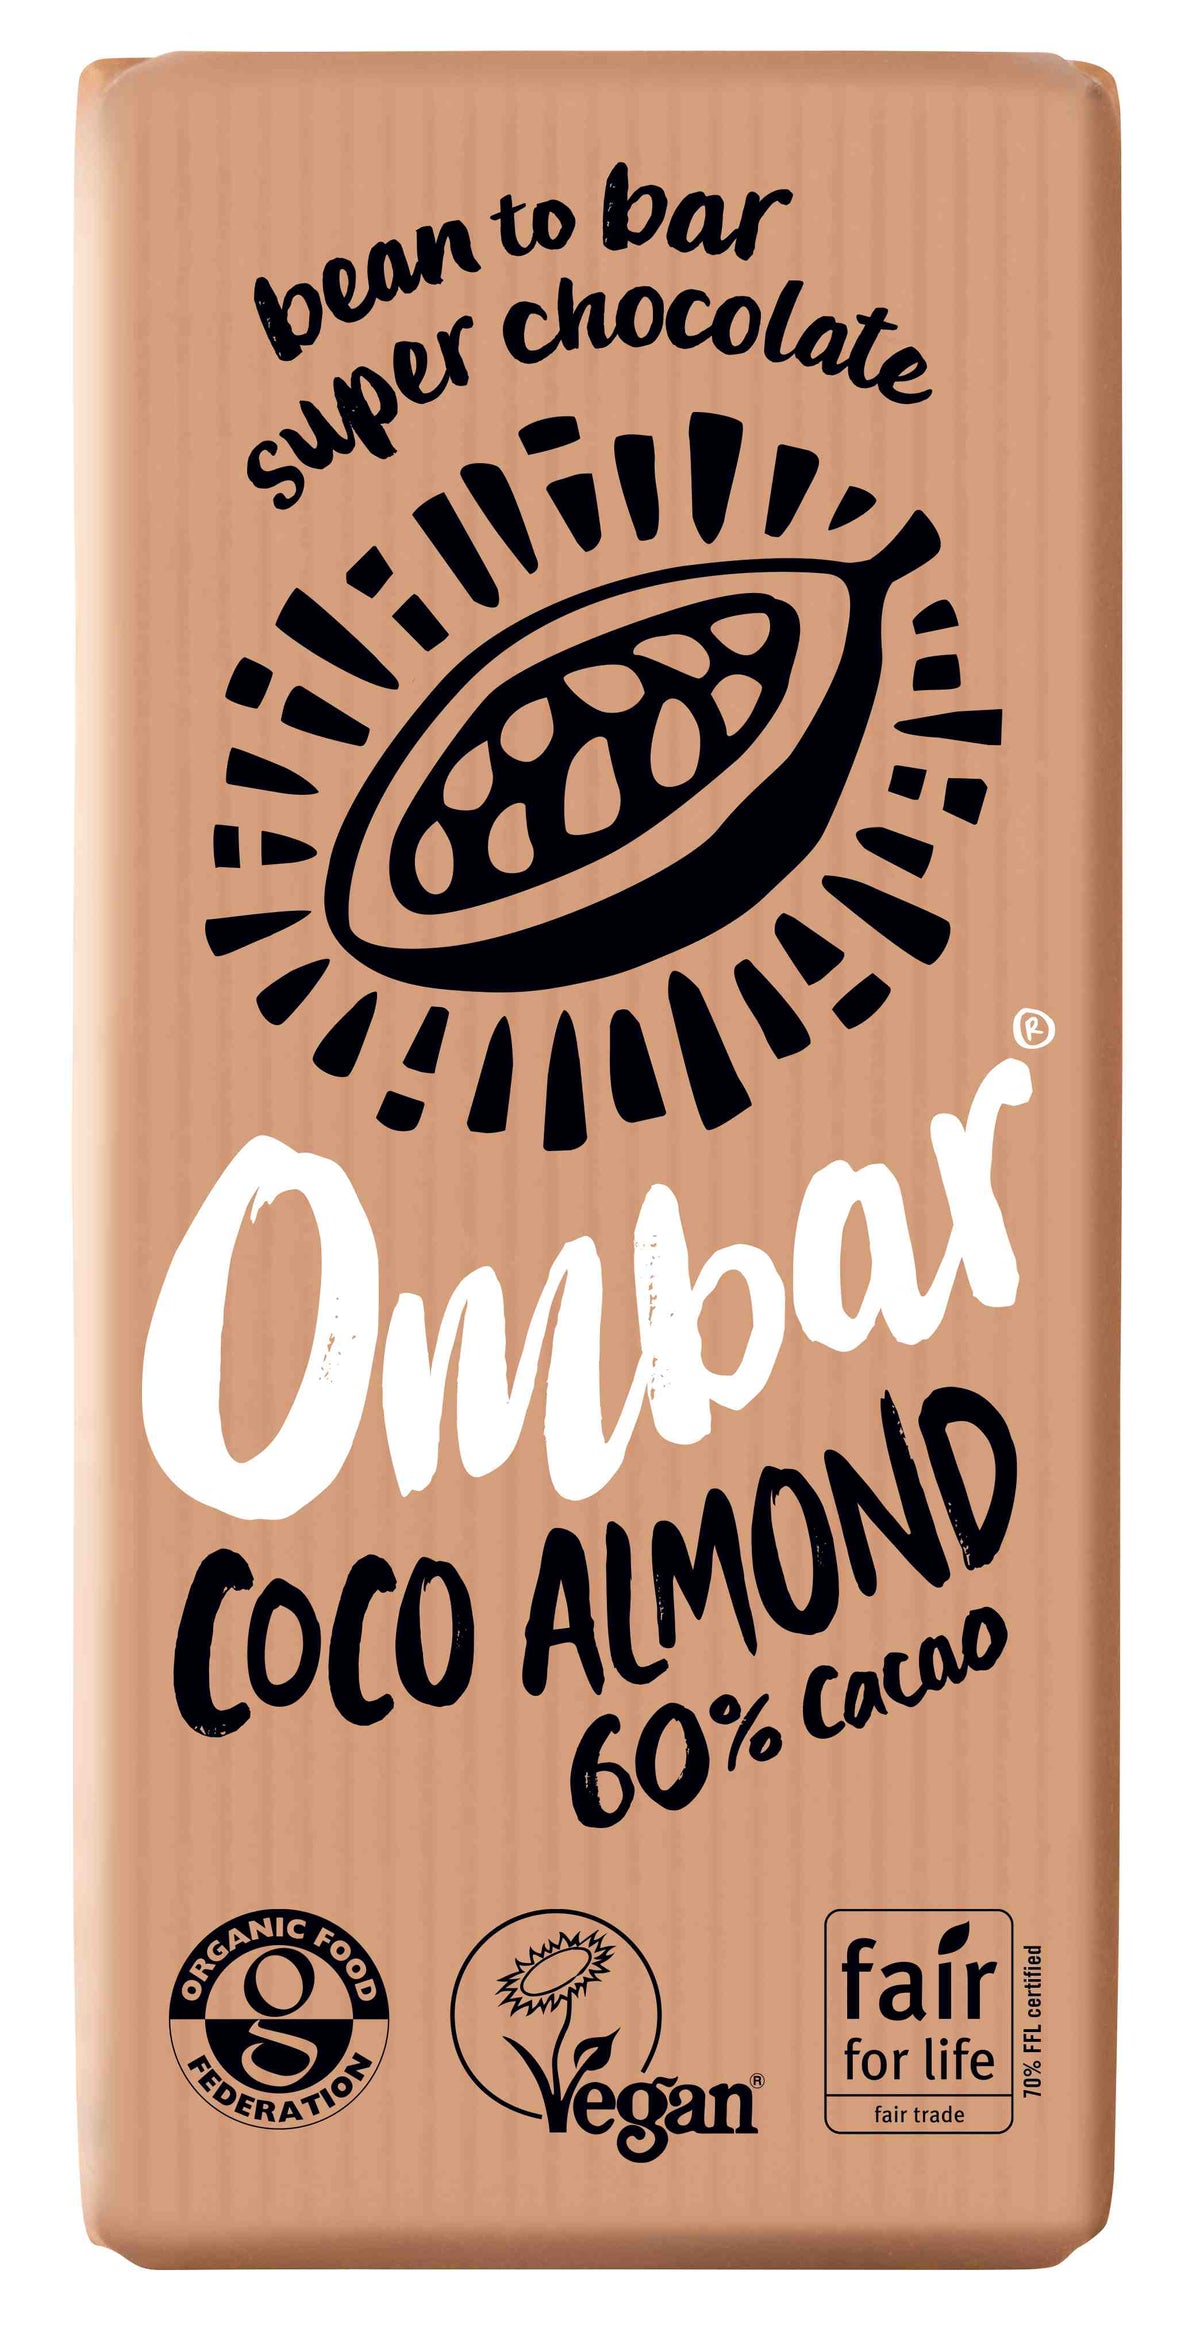 Organic Vegan Coco Almond Chocolate Bar | Ombar | Raw Living UK | Raw Chocolate | Raw Cacao | Ombar Coco Almond 60% Cacao Bar is an Organic, Vegan, Plant Based Raw Chocolate Bar. The bar is sweetened with Coconut Sugar &amp; enriched with delicious Almonds.